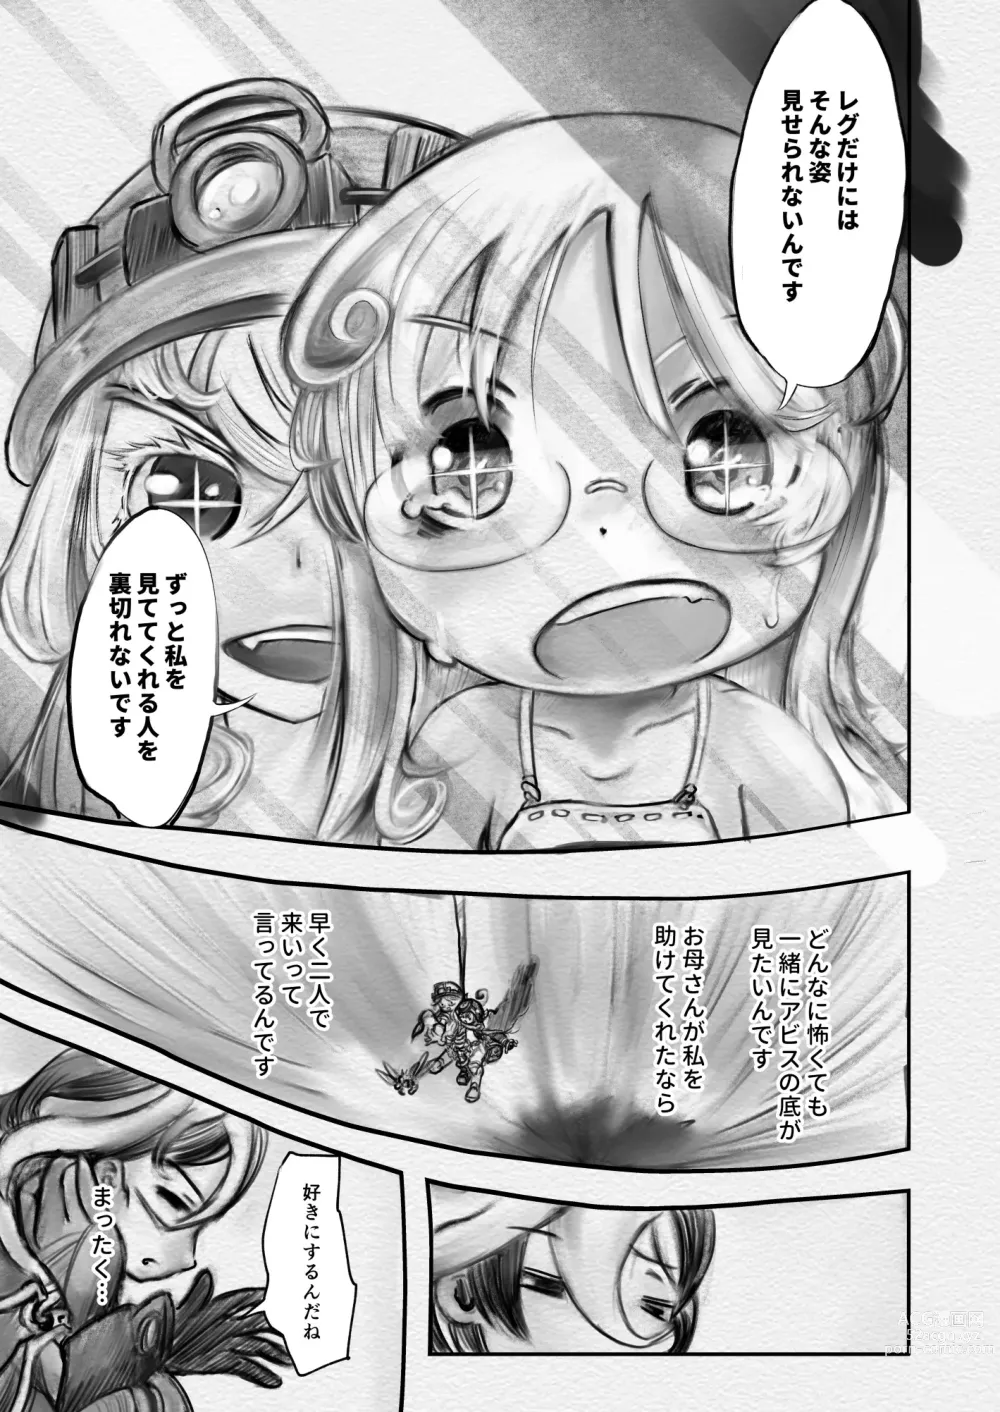 Page 37 of doujinshi Abyss Diver